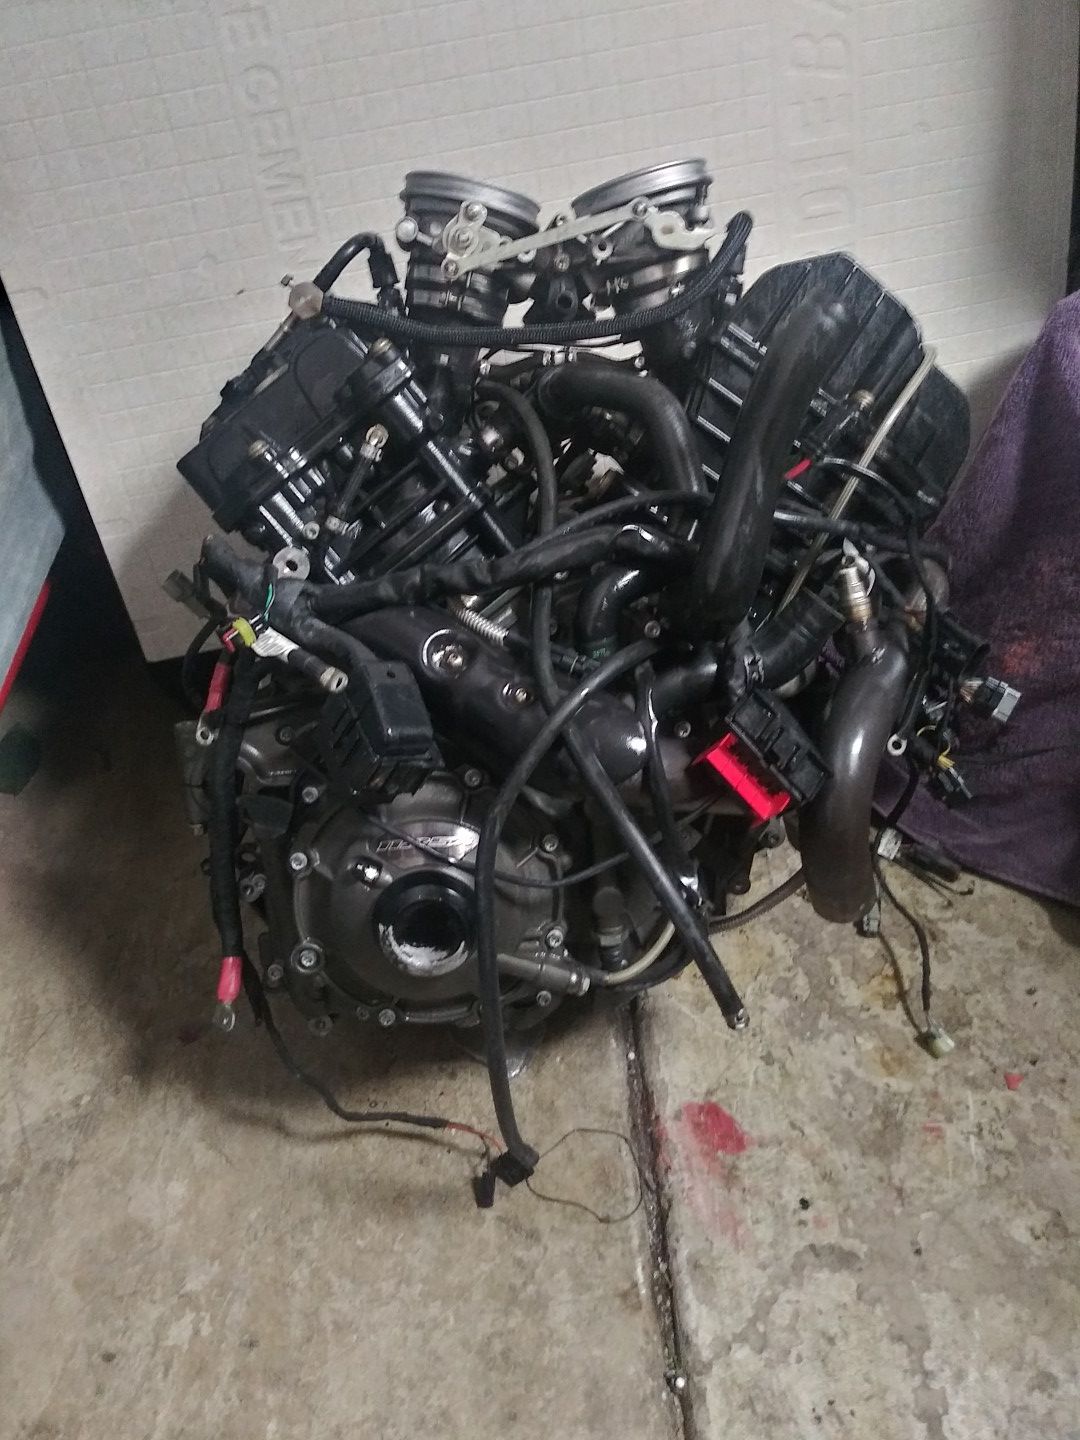 2009 Buell Motor Engine with 8200 Miles